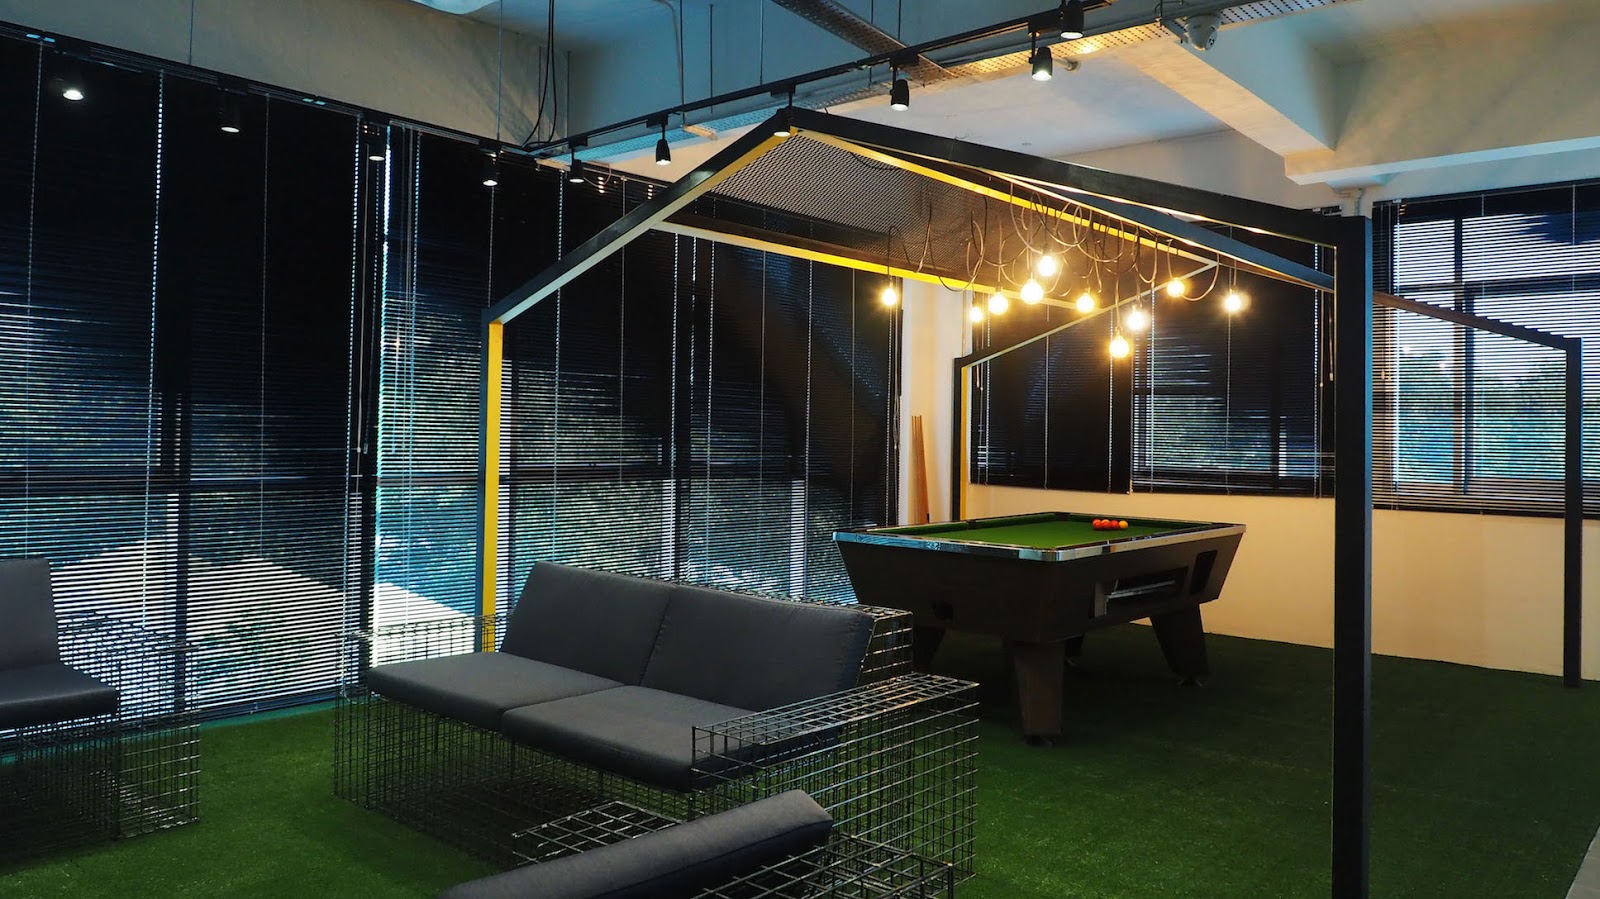 Games room with office pool table at Silverlake office in Taman Sains Selangor. Project by Sachi Interiors and EzyOffice